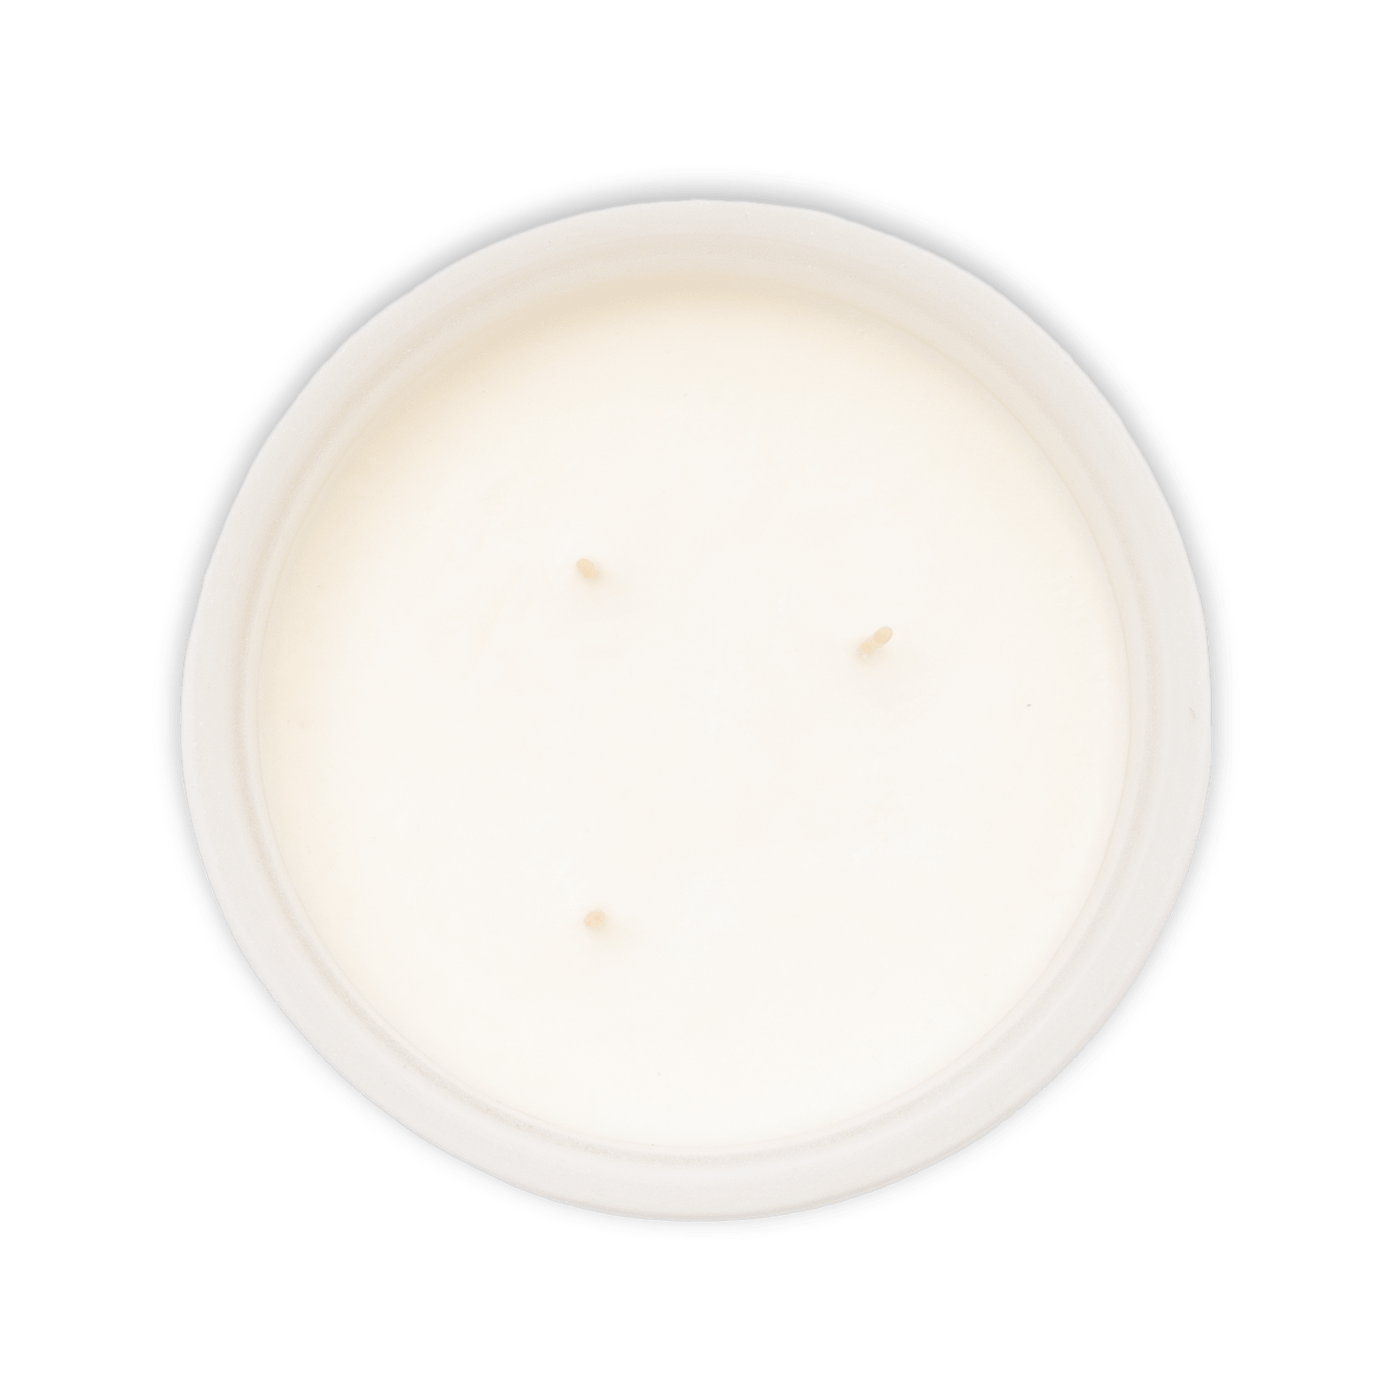 Calm 3-Wick Soy Wax Candle, White, 300 ml Candles sazy.com